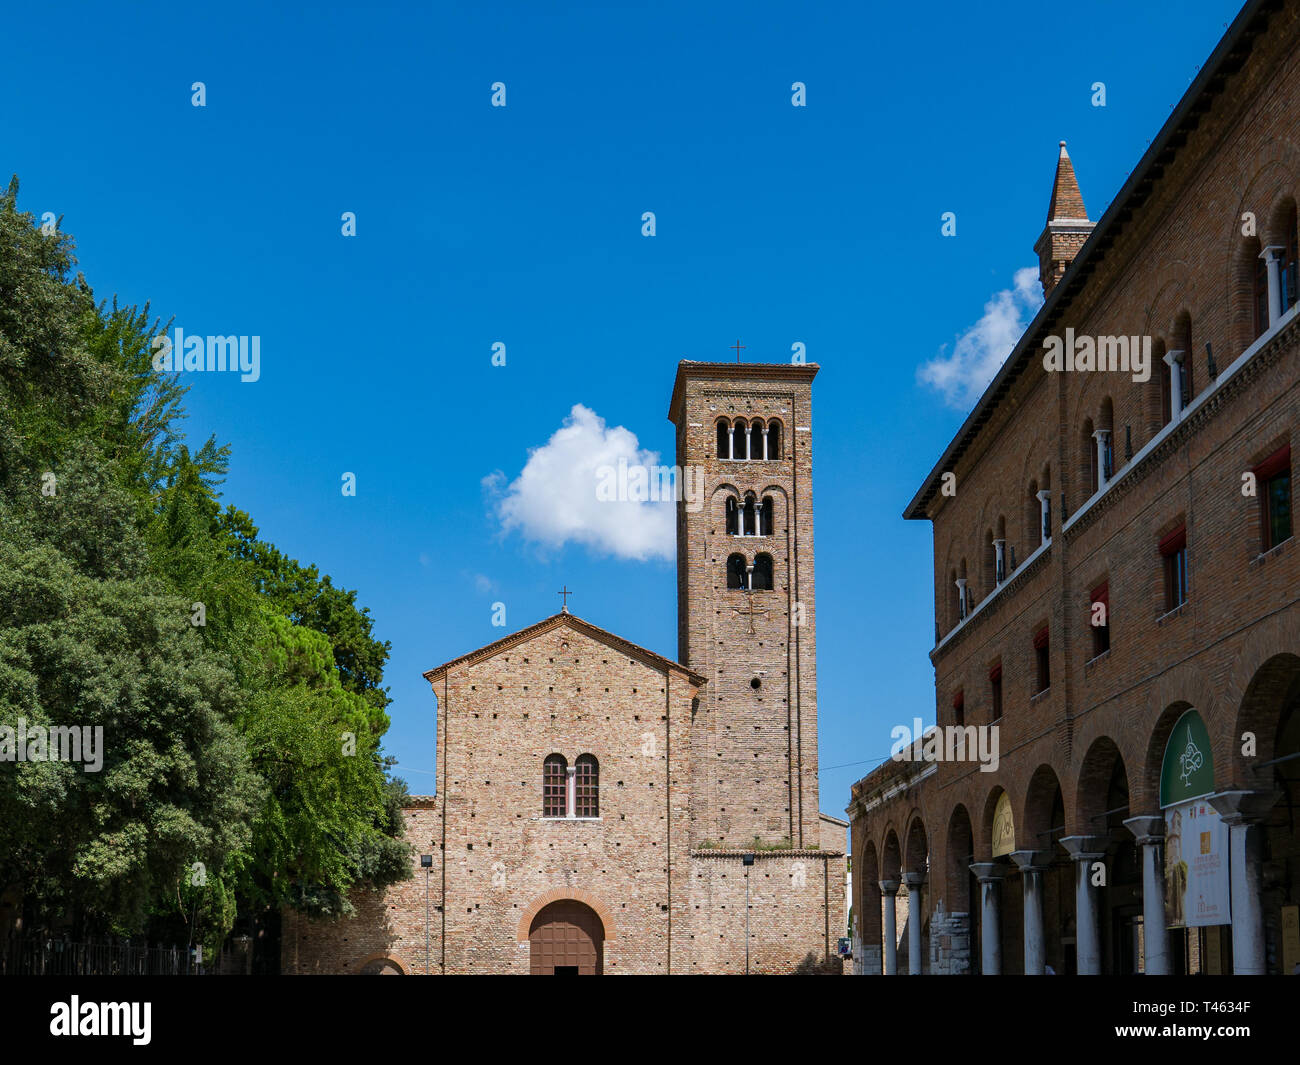 The Basilica of San Francesco is a major church in Ravenna. It was first built in 450 by Neo, bishop of Ravenna, and dedicated to saint Peter and Sain Stock Photo